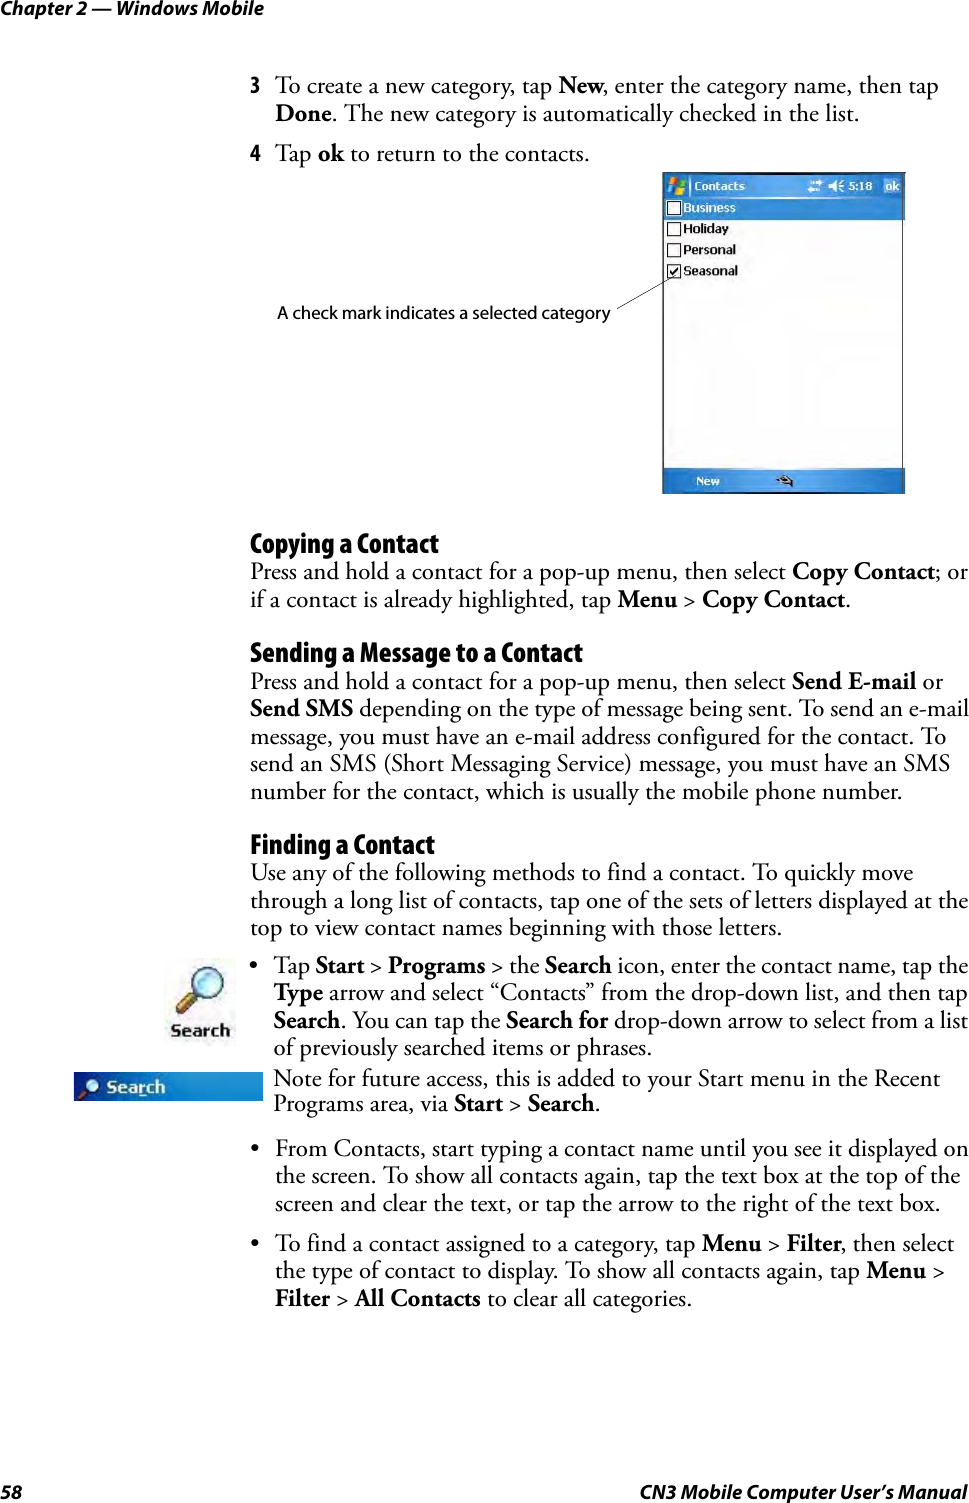 Chapter 2 — Windows Mobile58 CN3 Mobile Computer User’s Manual3To create a new category, tap New, enter the category name, then tap Done. The new category is automatically checked in the list.4Tap  ok to return to the contacts.Copying a ContactPress and hold a contact for a pop-up menu, then select Copy Contact; or if a contact is already highlighted, tap Menu &gt; Copy Contact.Sending a Message to a ContactPress and hold a contact for a pop-up menu, then select Send E-mail or Send SMS depending on the type of message being sent. To send an e-mail message, you must have an e-mail address configured for the contact. To send an SMS (Short Messaging Service) message, you must have an SMS number for the contact, which is usually the mobile phone number.Finding a ContactUse any of the following methods to find a contact. To quickly move through a long list of contacts, tap one of the sets of letters displayed at the top to view contact names beginning with those letters.• From Contacts, start typing a contact name until you see it displayed on the screen. To show all contacts again, tap the text box at the top of the screen and clear the text, or tap the arrow to the right of the text box.• To find a contact assigned to a category, tap Menu &gt; Filter, then select the type of contact to display. To show all contacts again, tap Menu &gt; Filter &gt; All Contacts to clear all categories.•Tap Start &gt; Programs &gt; the Search icon, enter the contact name, tap the Type arrow and select “Contacts” from the drop-down list, and then tap Search. You can tap the Search for drop-down arrow to select from a list of previously searched items or phrases.Note for future access, this is added to your Start menu in the Recent Programs area, via Start &gt; Search.A check mark indicates a selected category